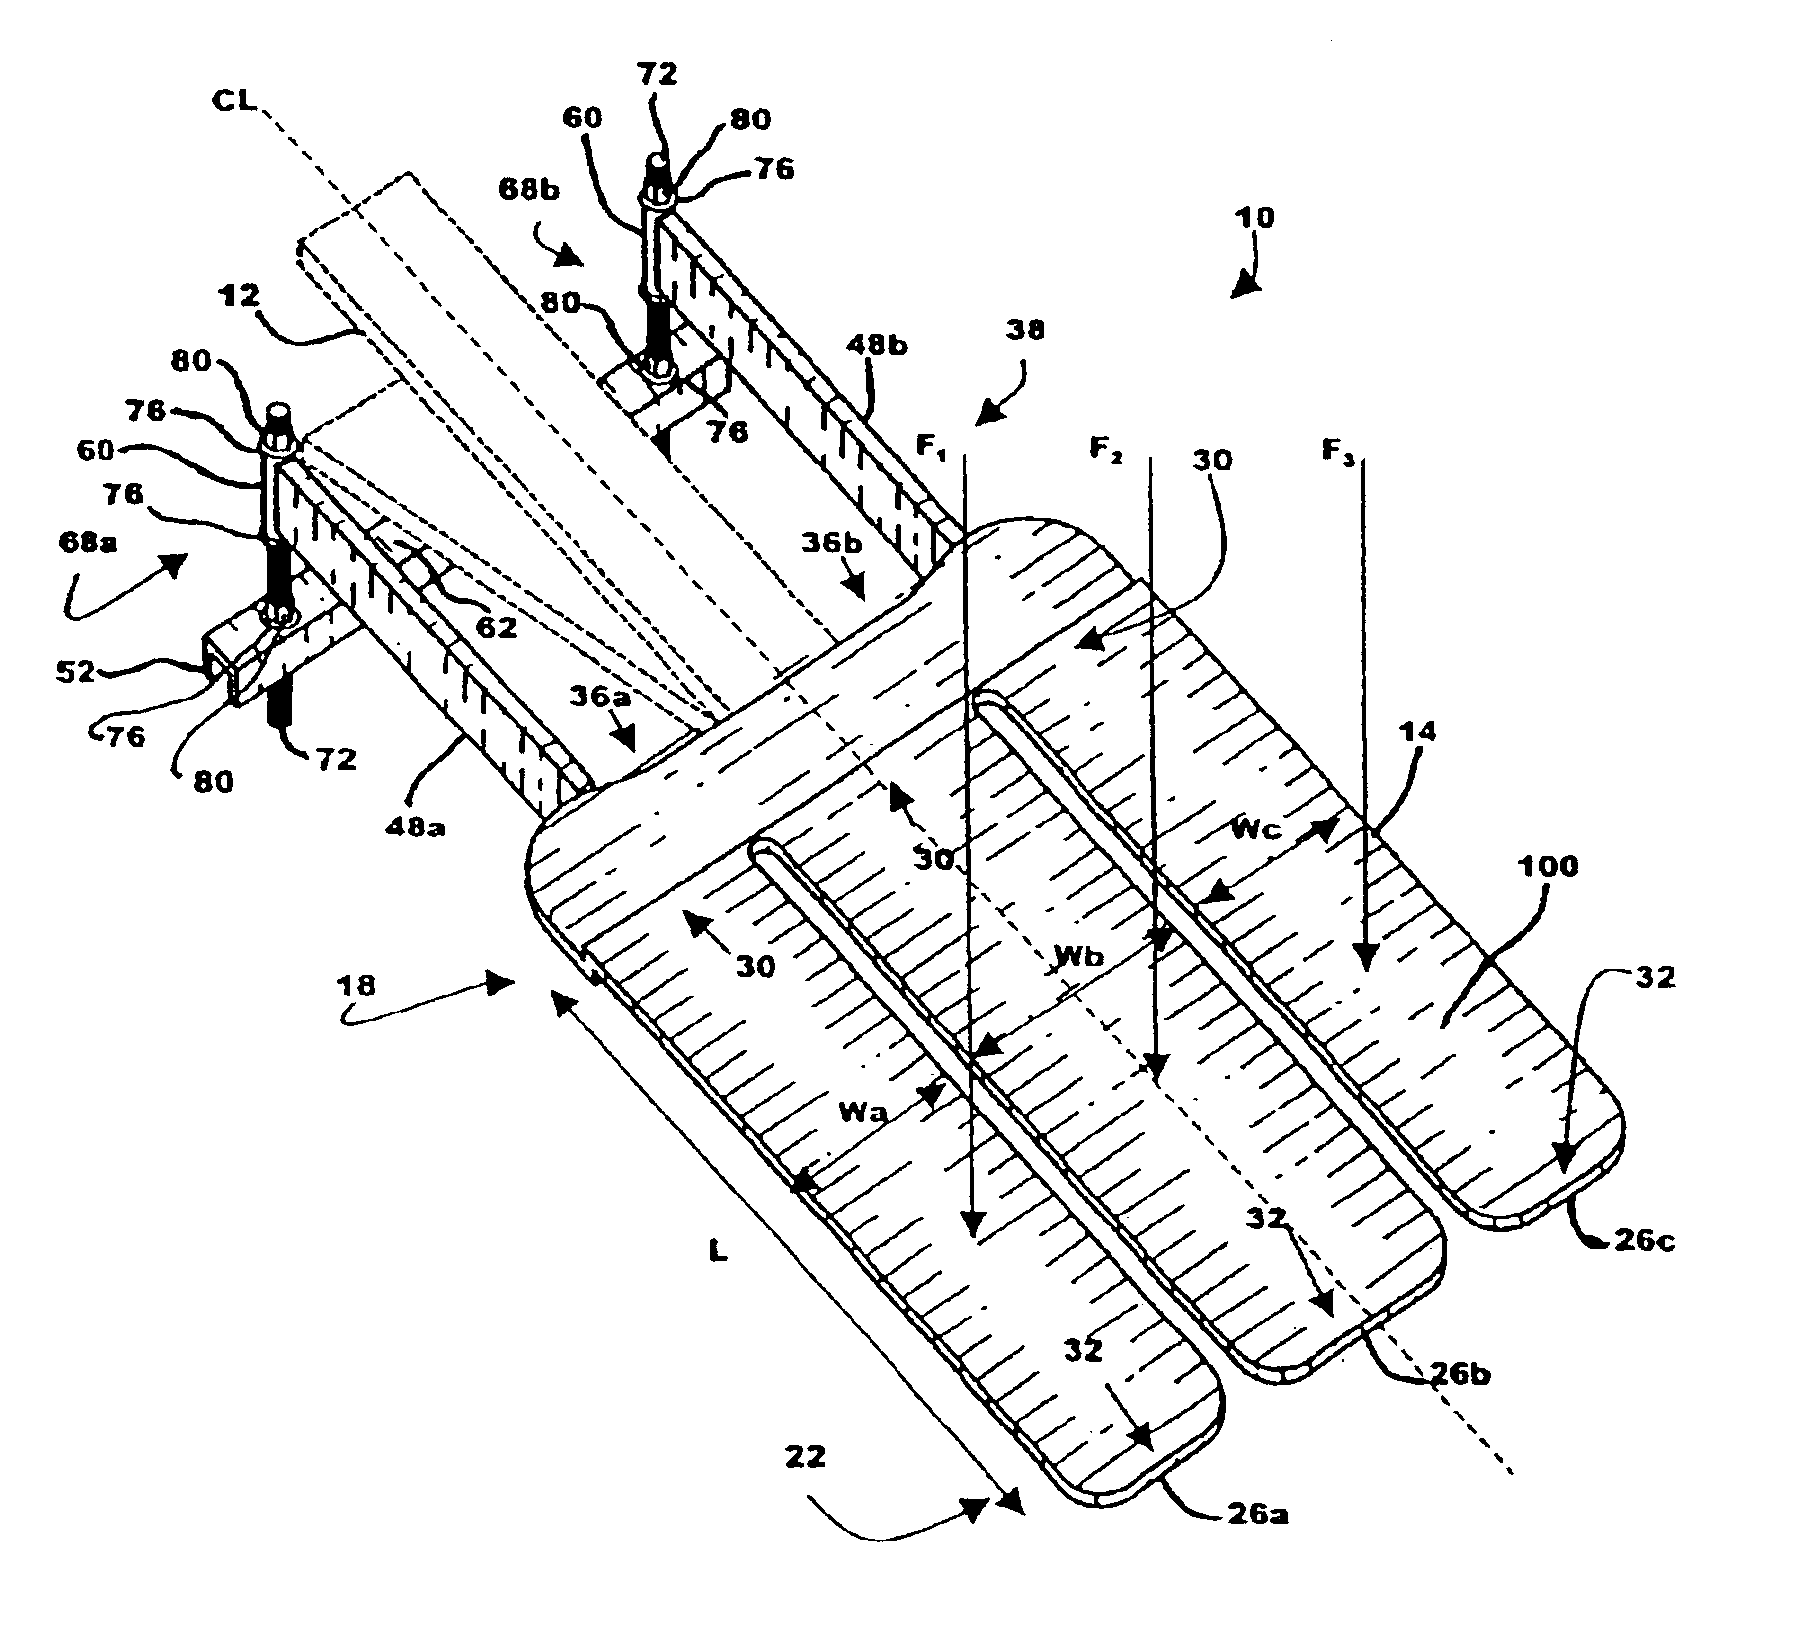 Multi-use pallet with torsion control for a printing machine